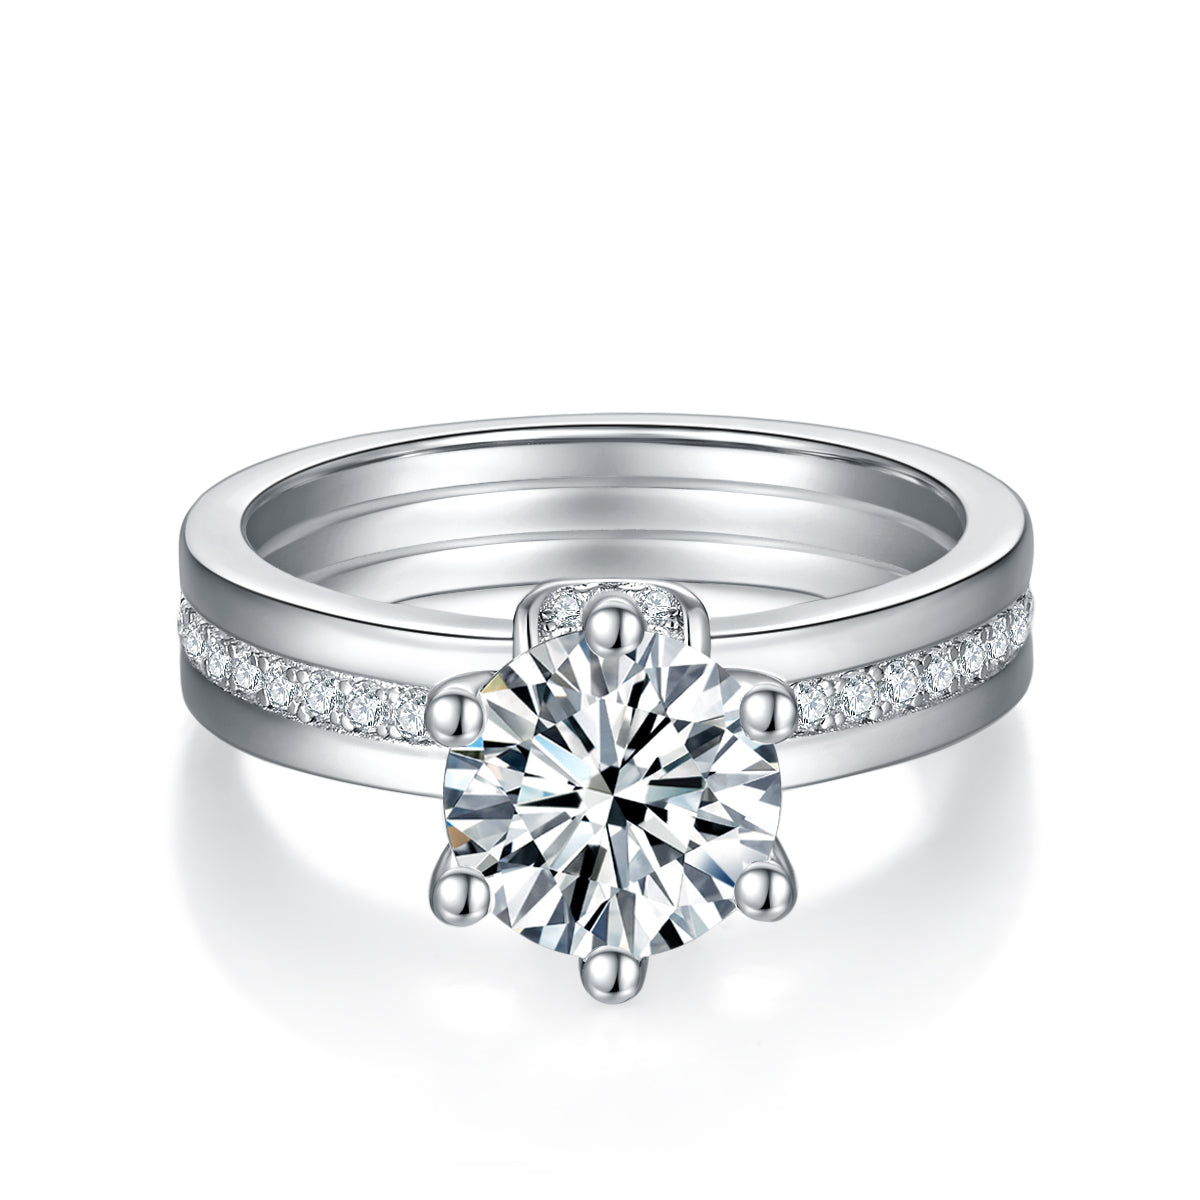 IE0227 2CT MOISSANITE ENGAGEMENT RING IN STERLING SILVER